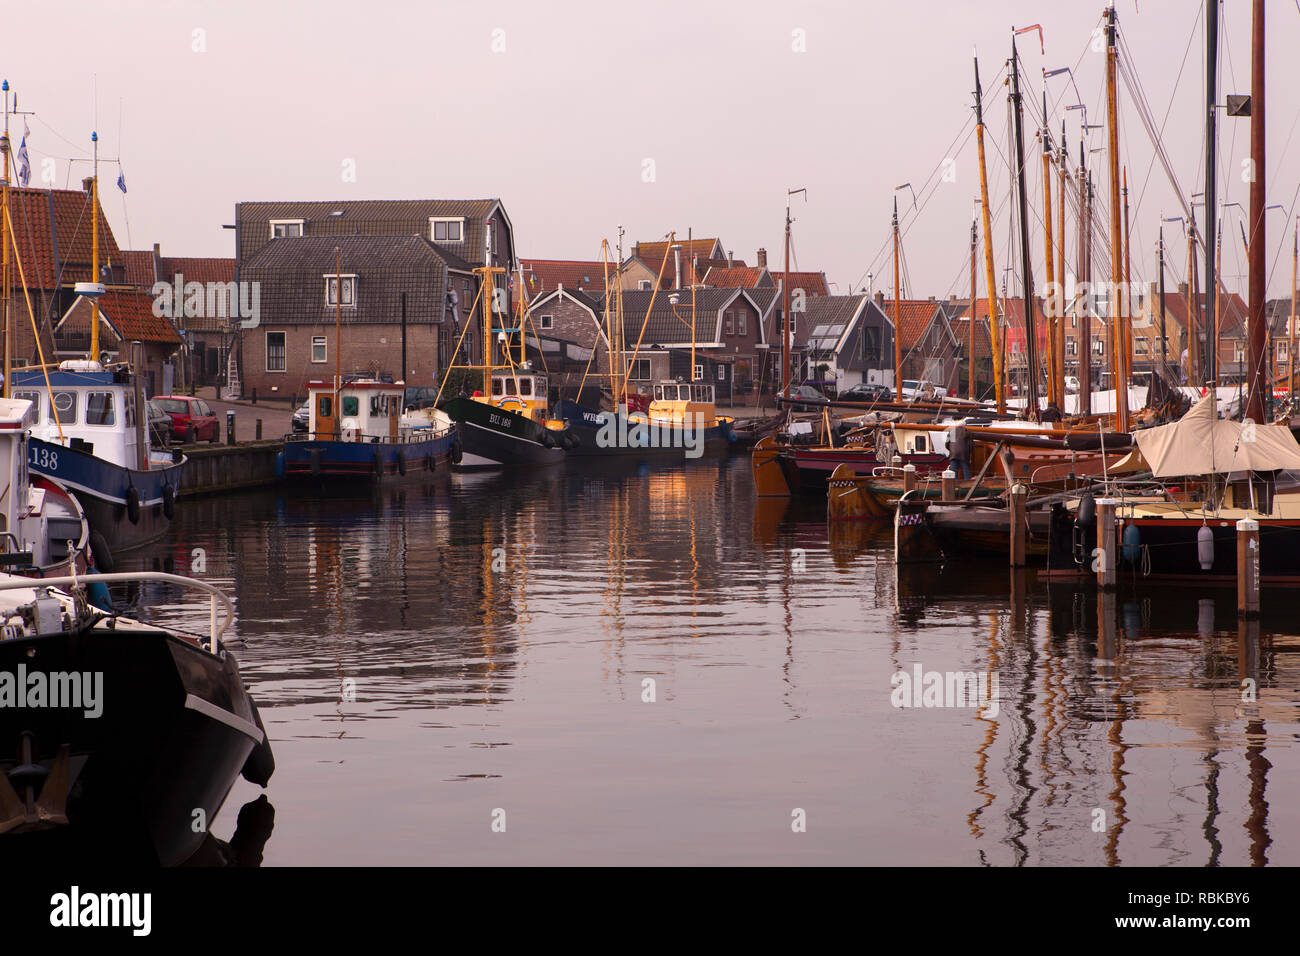 Boats on a canal at Spakenburg, Netherlands. Stock Photo